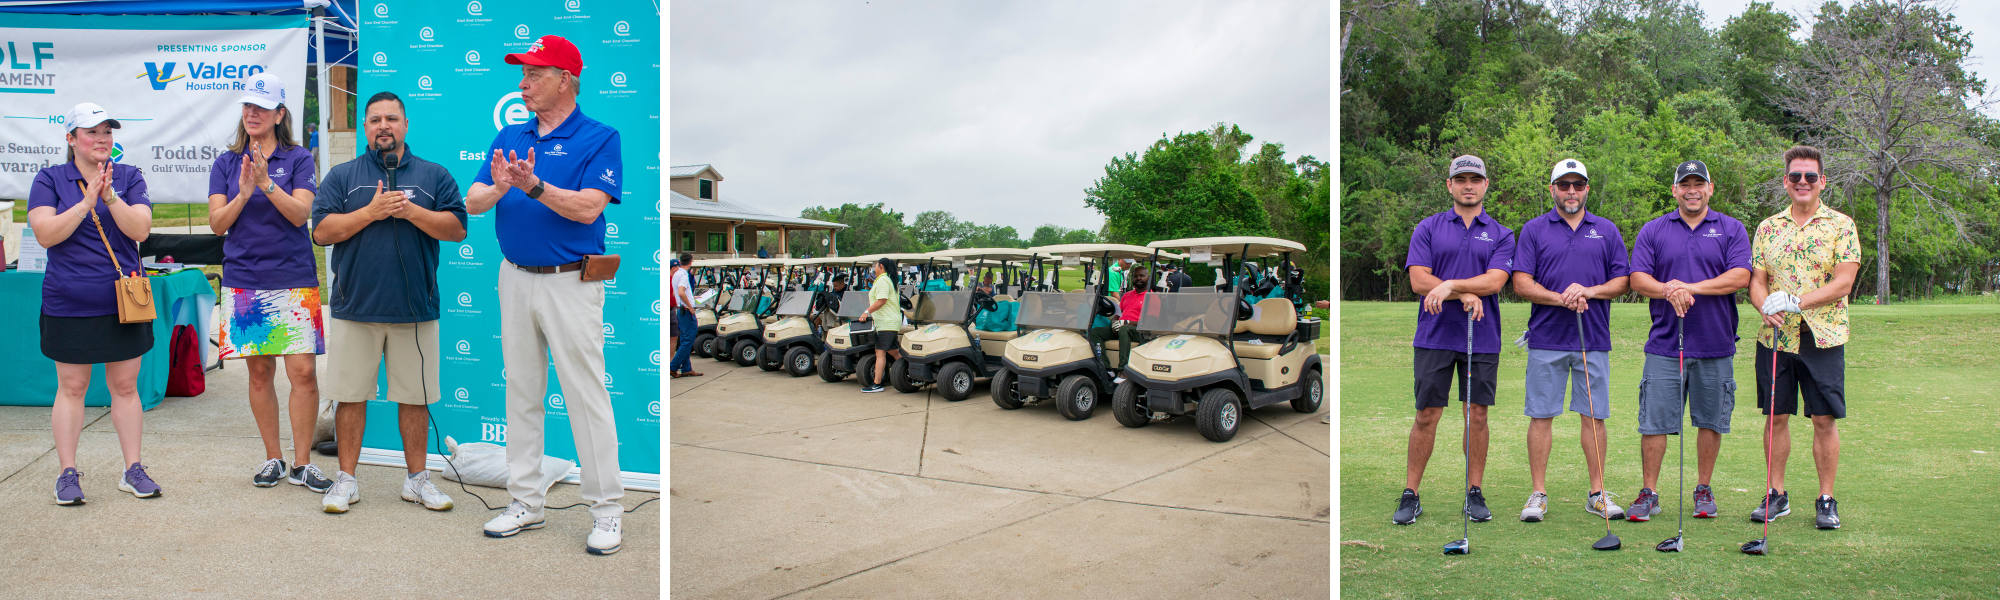 Perfect Swing for Scholarships: Recap of 2022 East End Chamber Golf Tournament